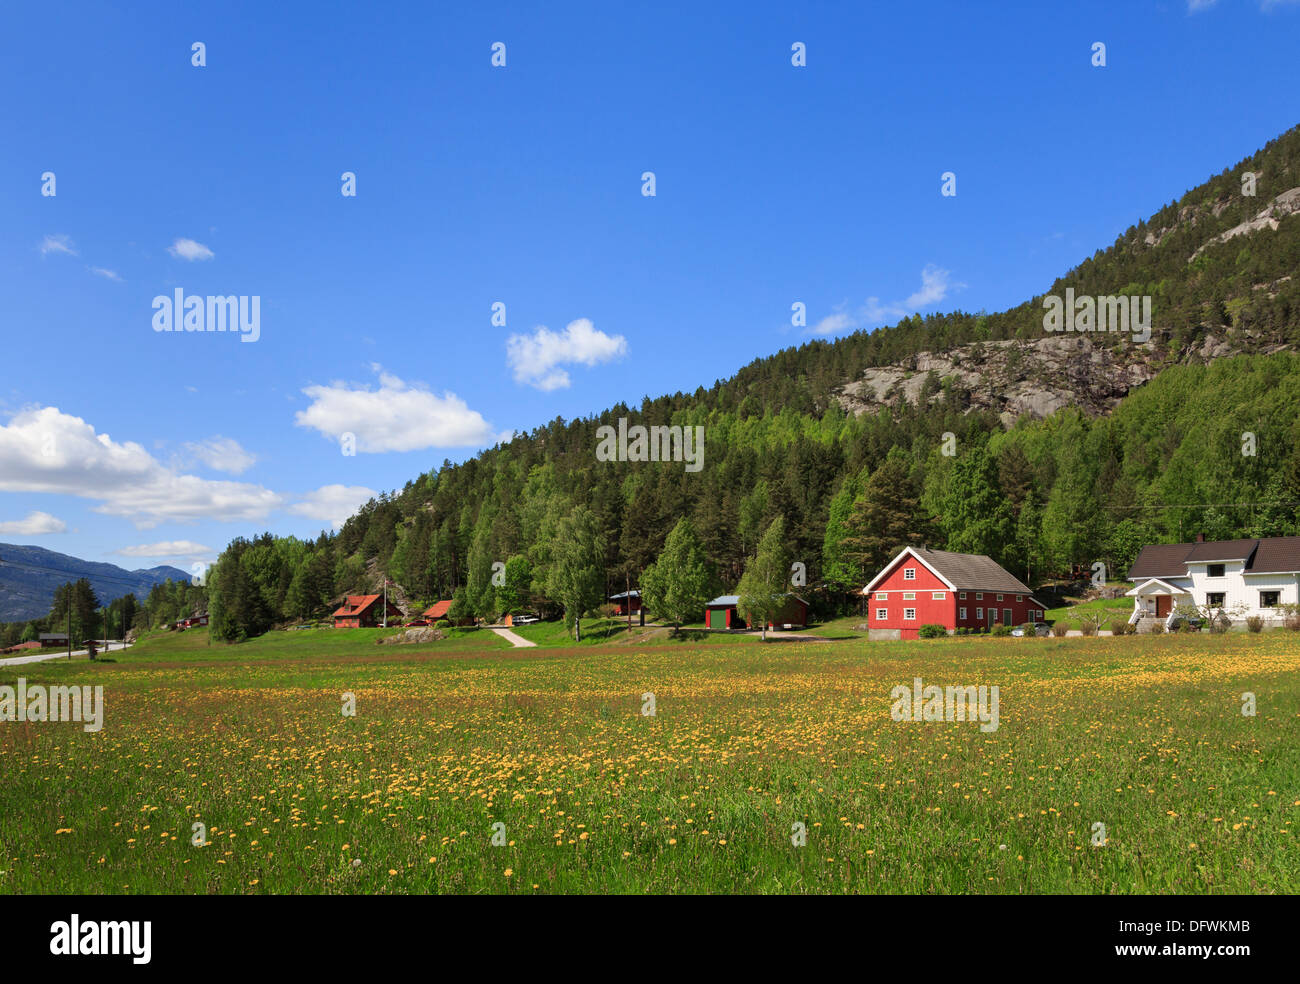 Yellow flower meadow and typical red wooden barn in a rural farming community near Vradal, Kviteseid, Telemark, Norway Stock Photo